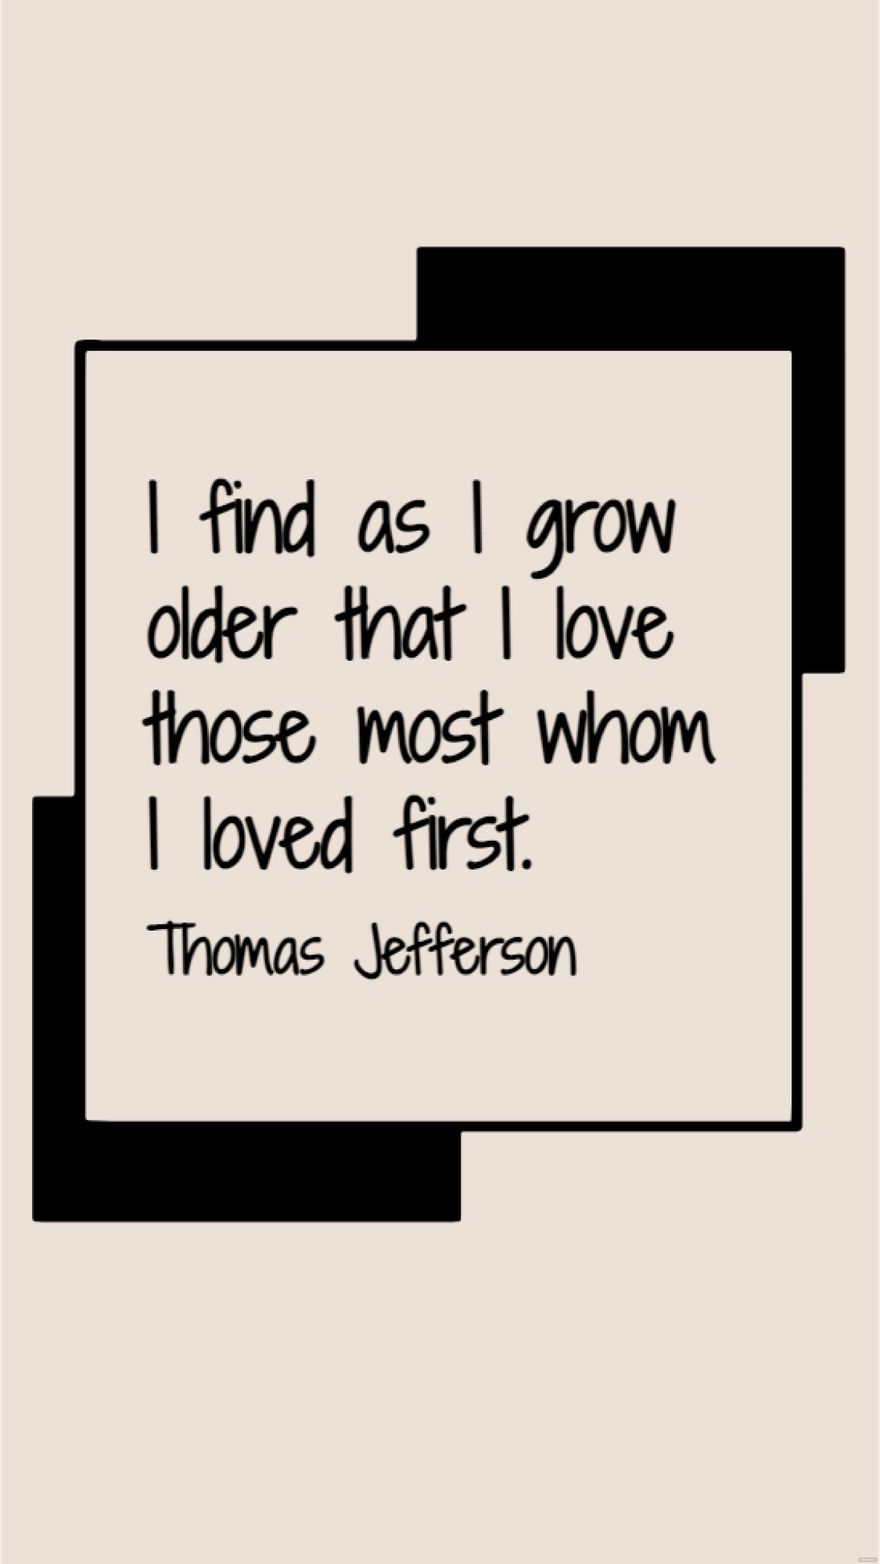 Thomas Jefferson - I find as I grow older that I love those most whom I loved first.